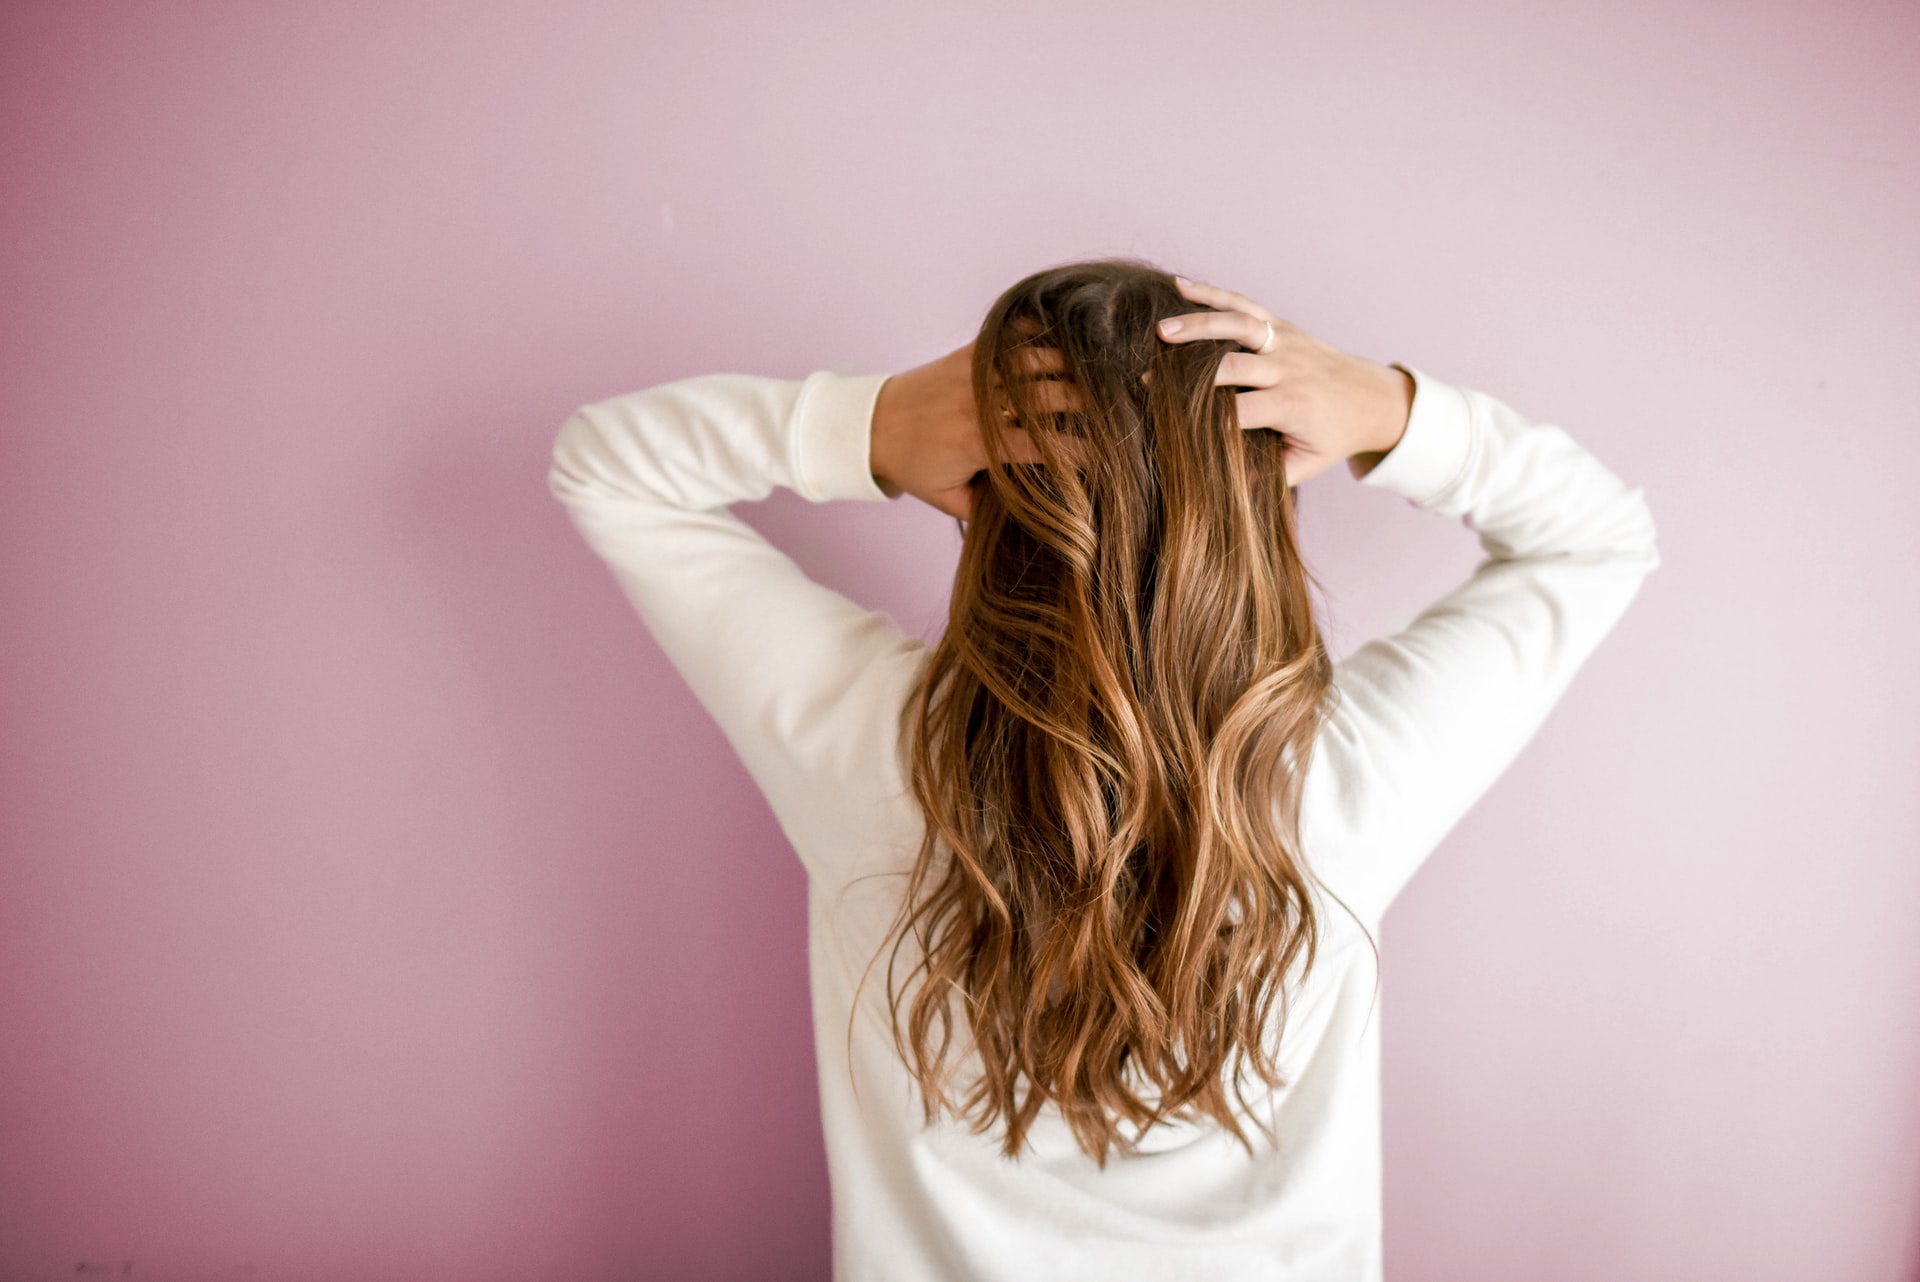 Olive oil for beautiful and shiny hair. How to use it?